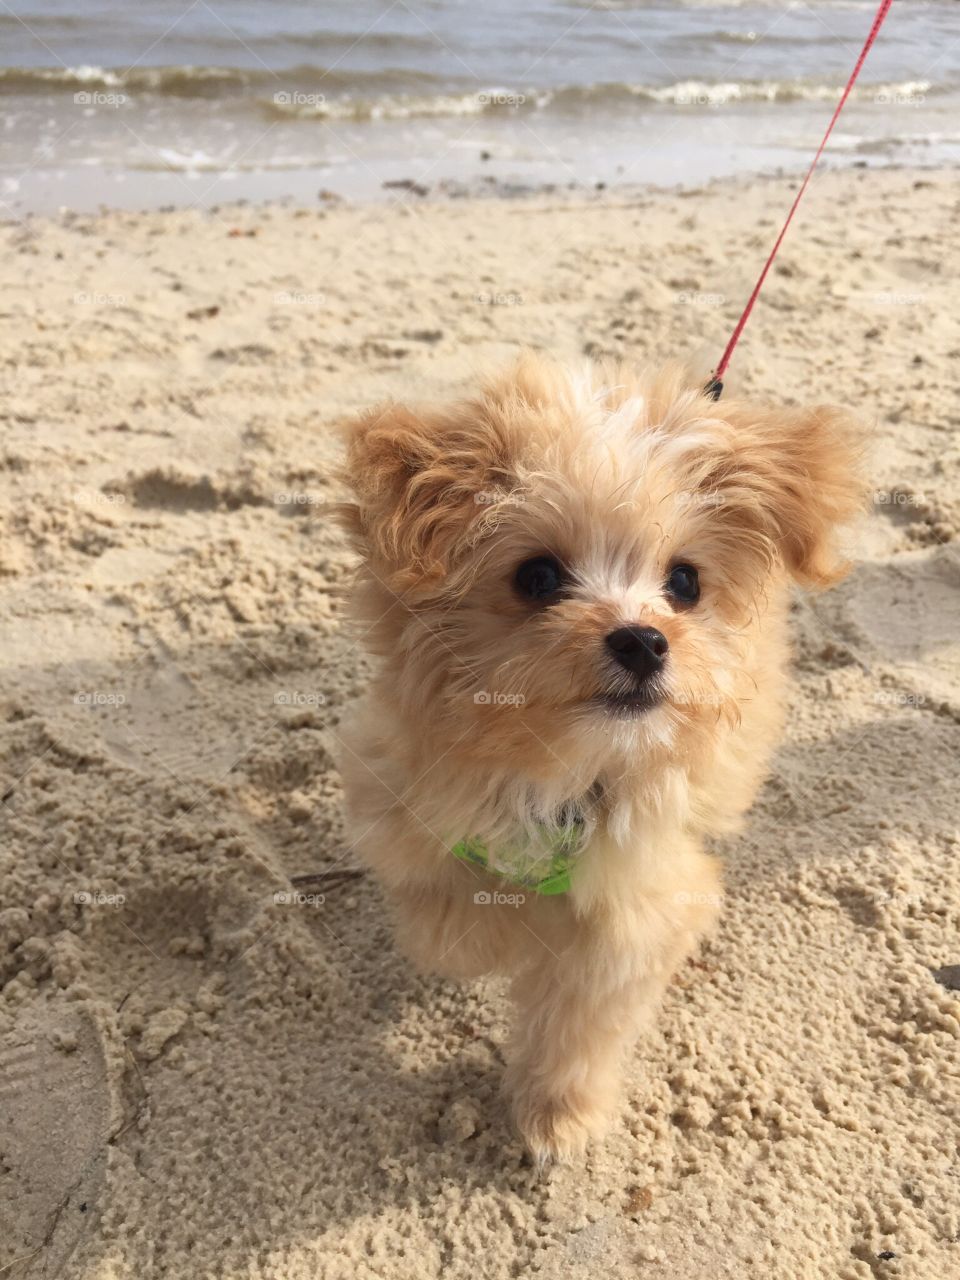 Chiapoo puppy hanging out on the sandy beach